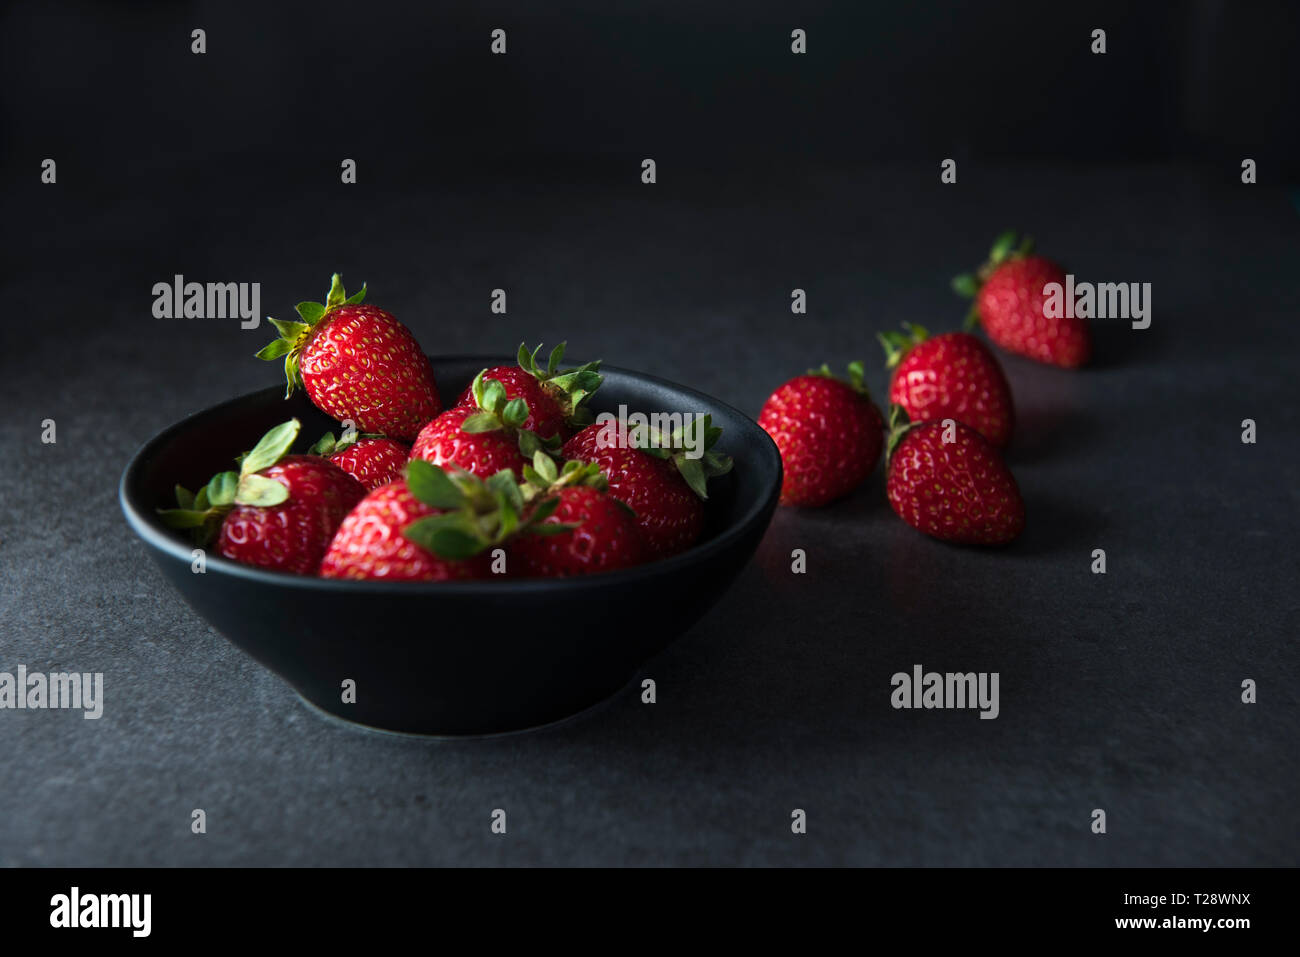 Strawberries in dark bowl on dark background with copy space, low key image Stock Photo